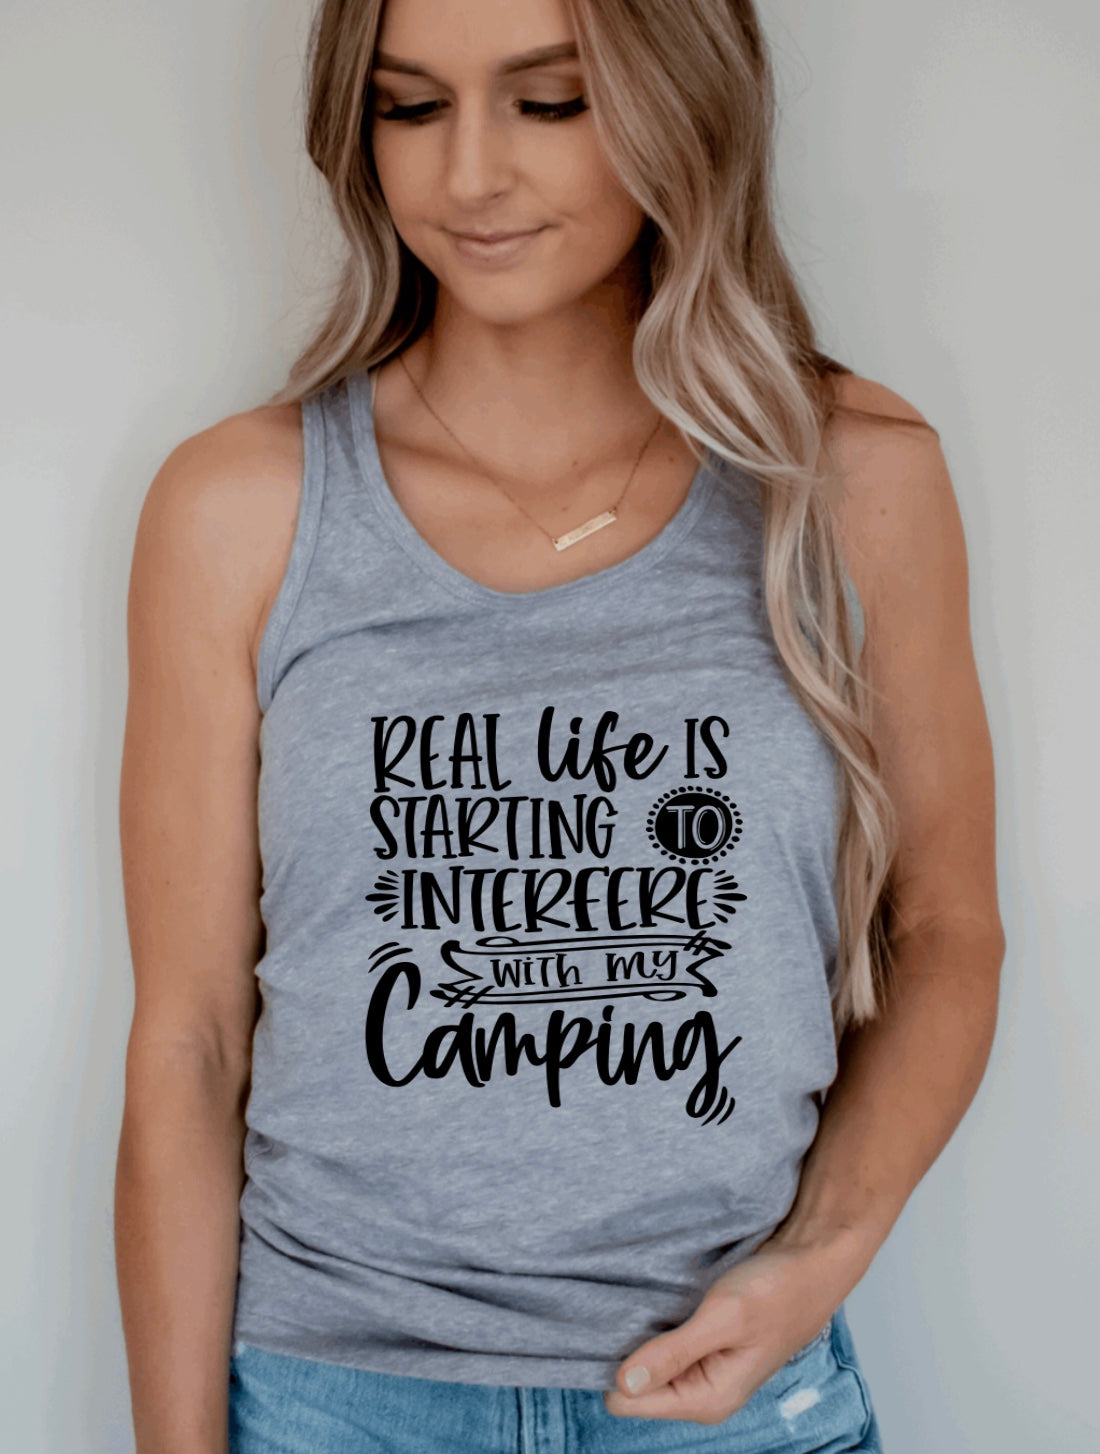 Real life is starting to interfere with my camping racerback tank top 